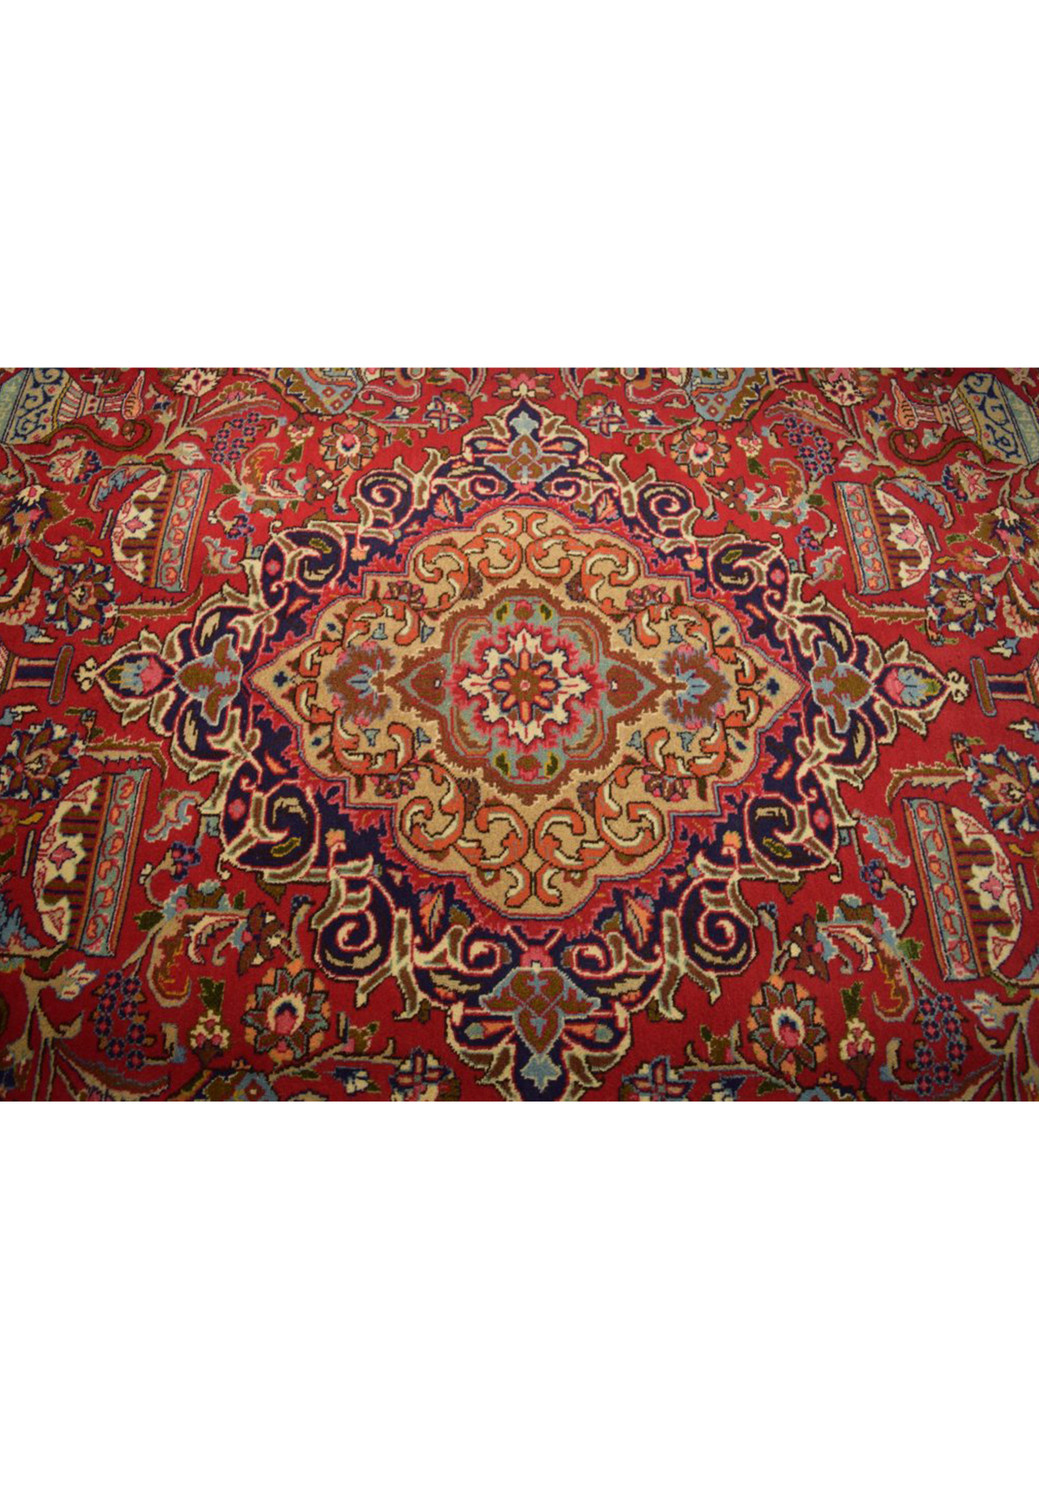 A detailed view of the central medallion of the Persian Kashmar rug, featuring intricate designs and a rich mix of red, gold, and blue hues